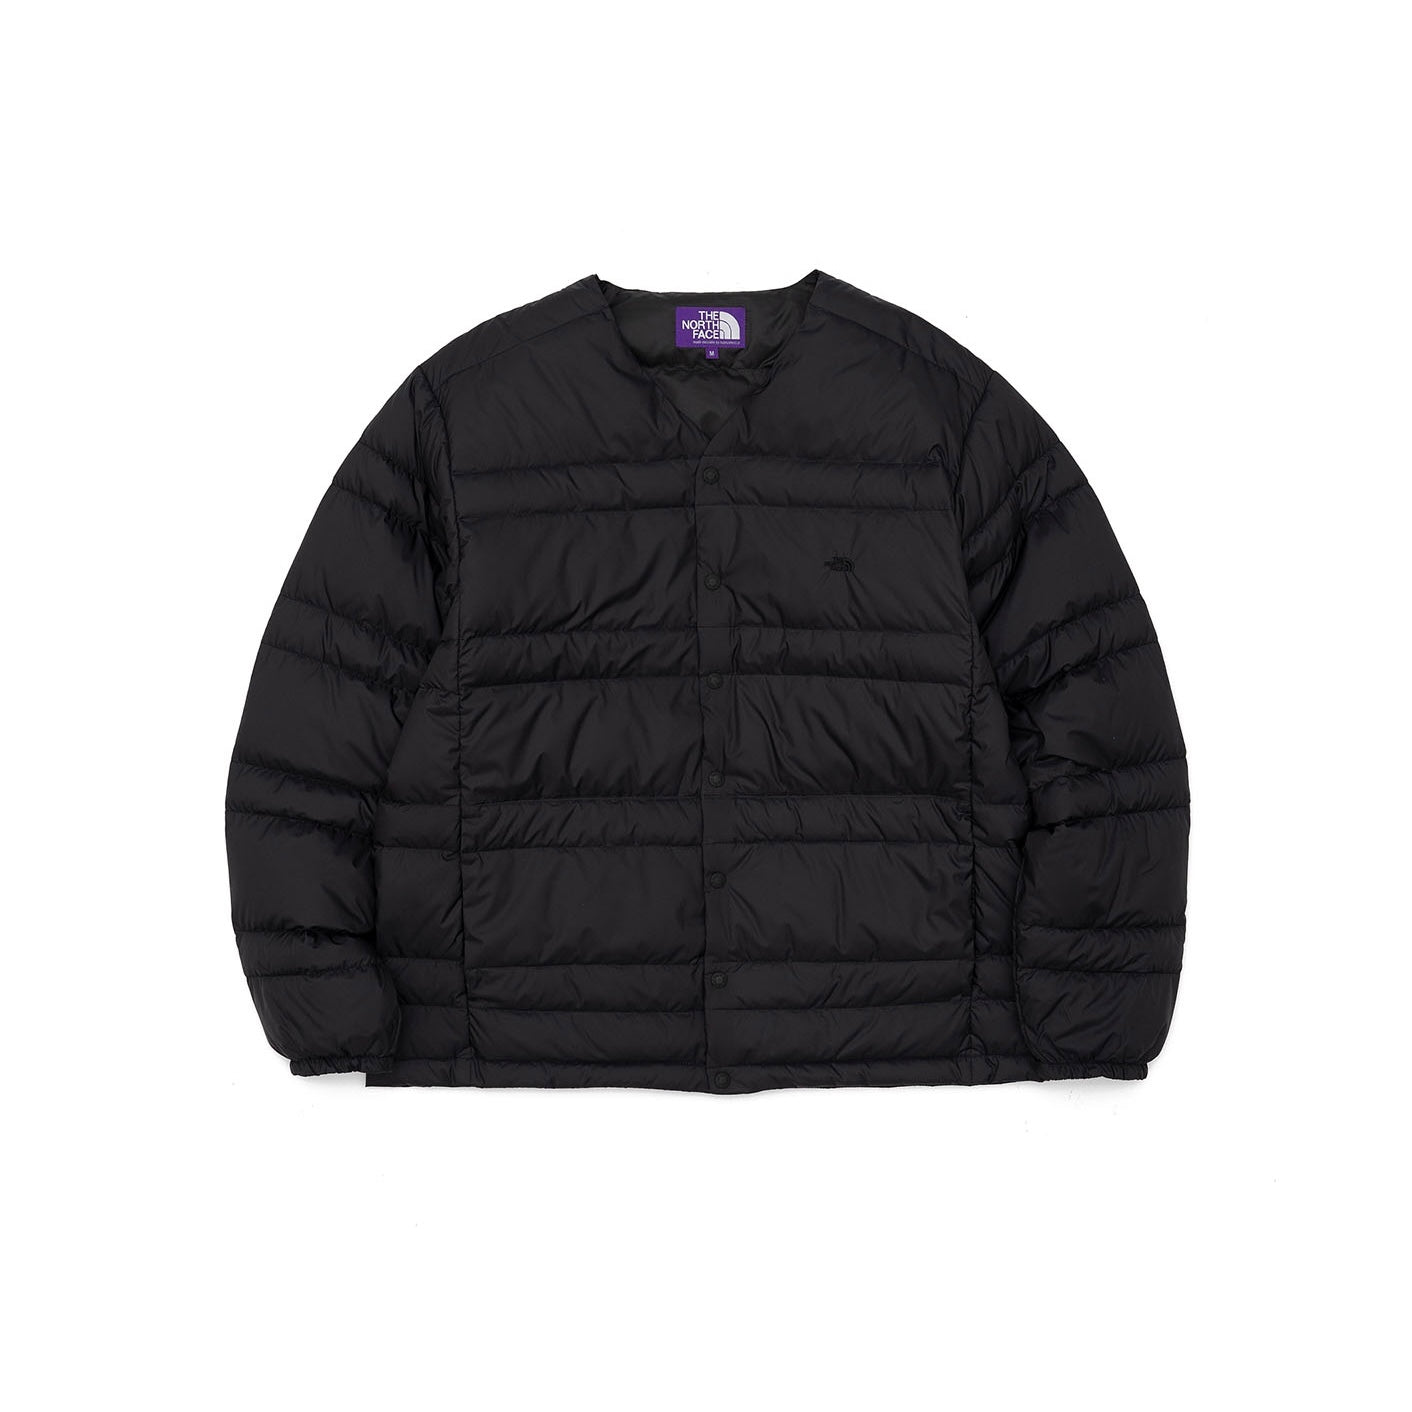 THE NORTH FACE PURPLE LABEL Ripstop Shirt Jacket NY2104N ノース